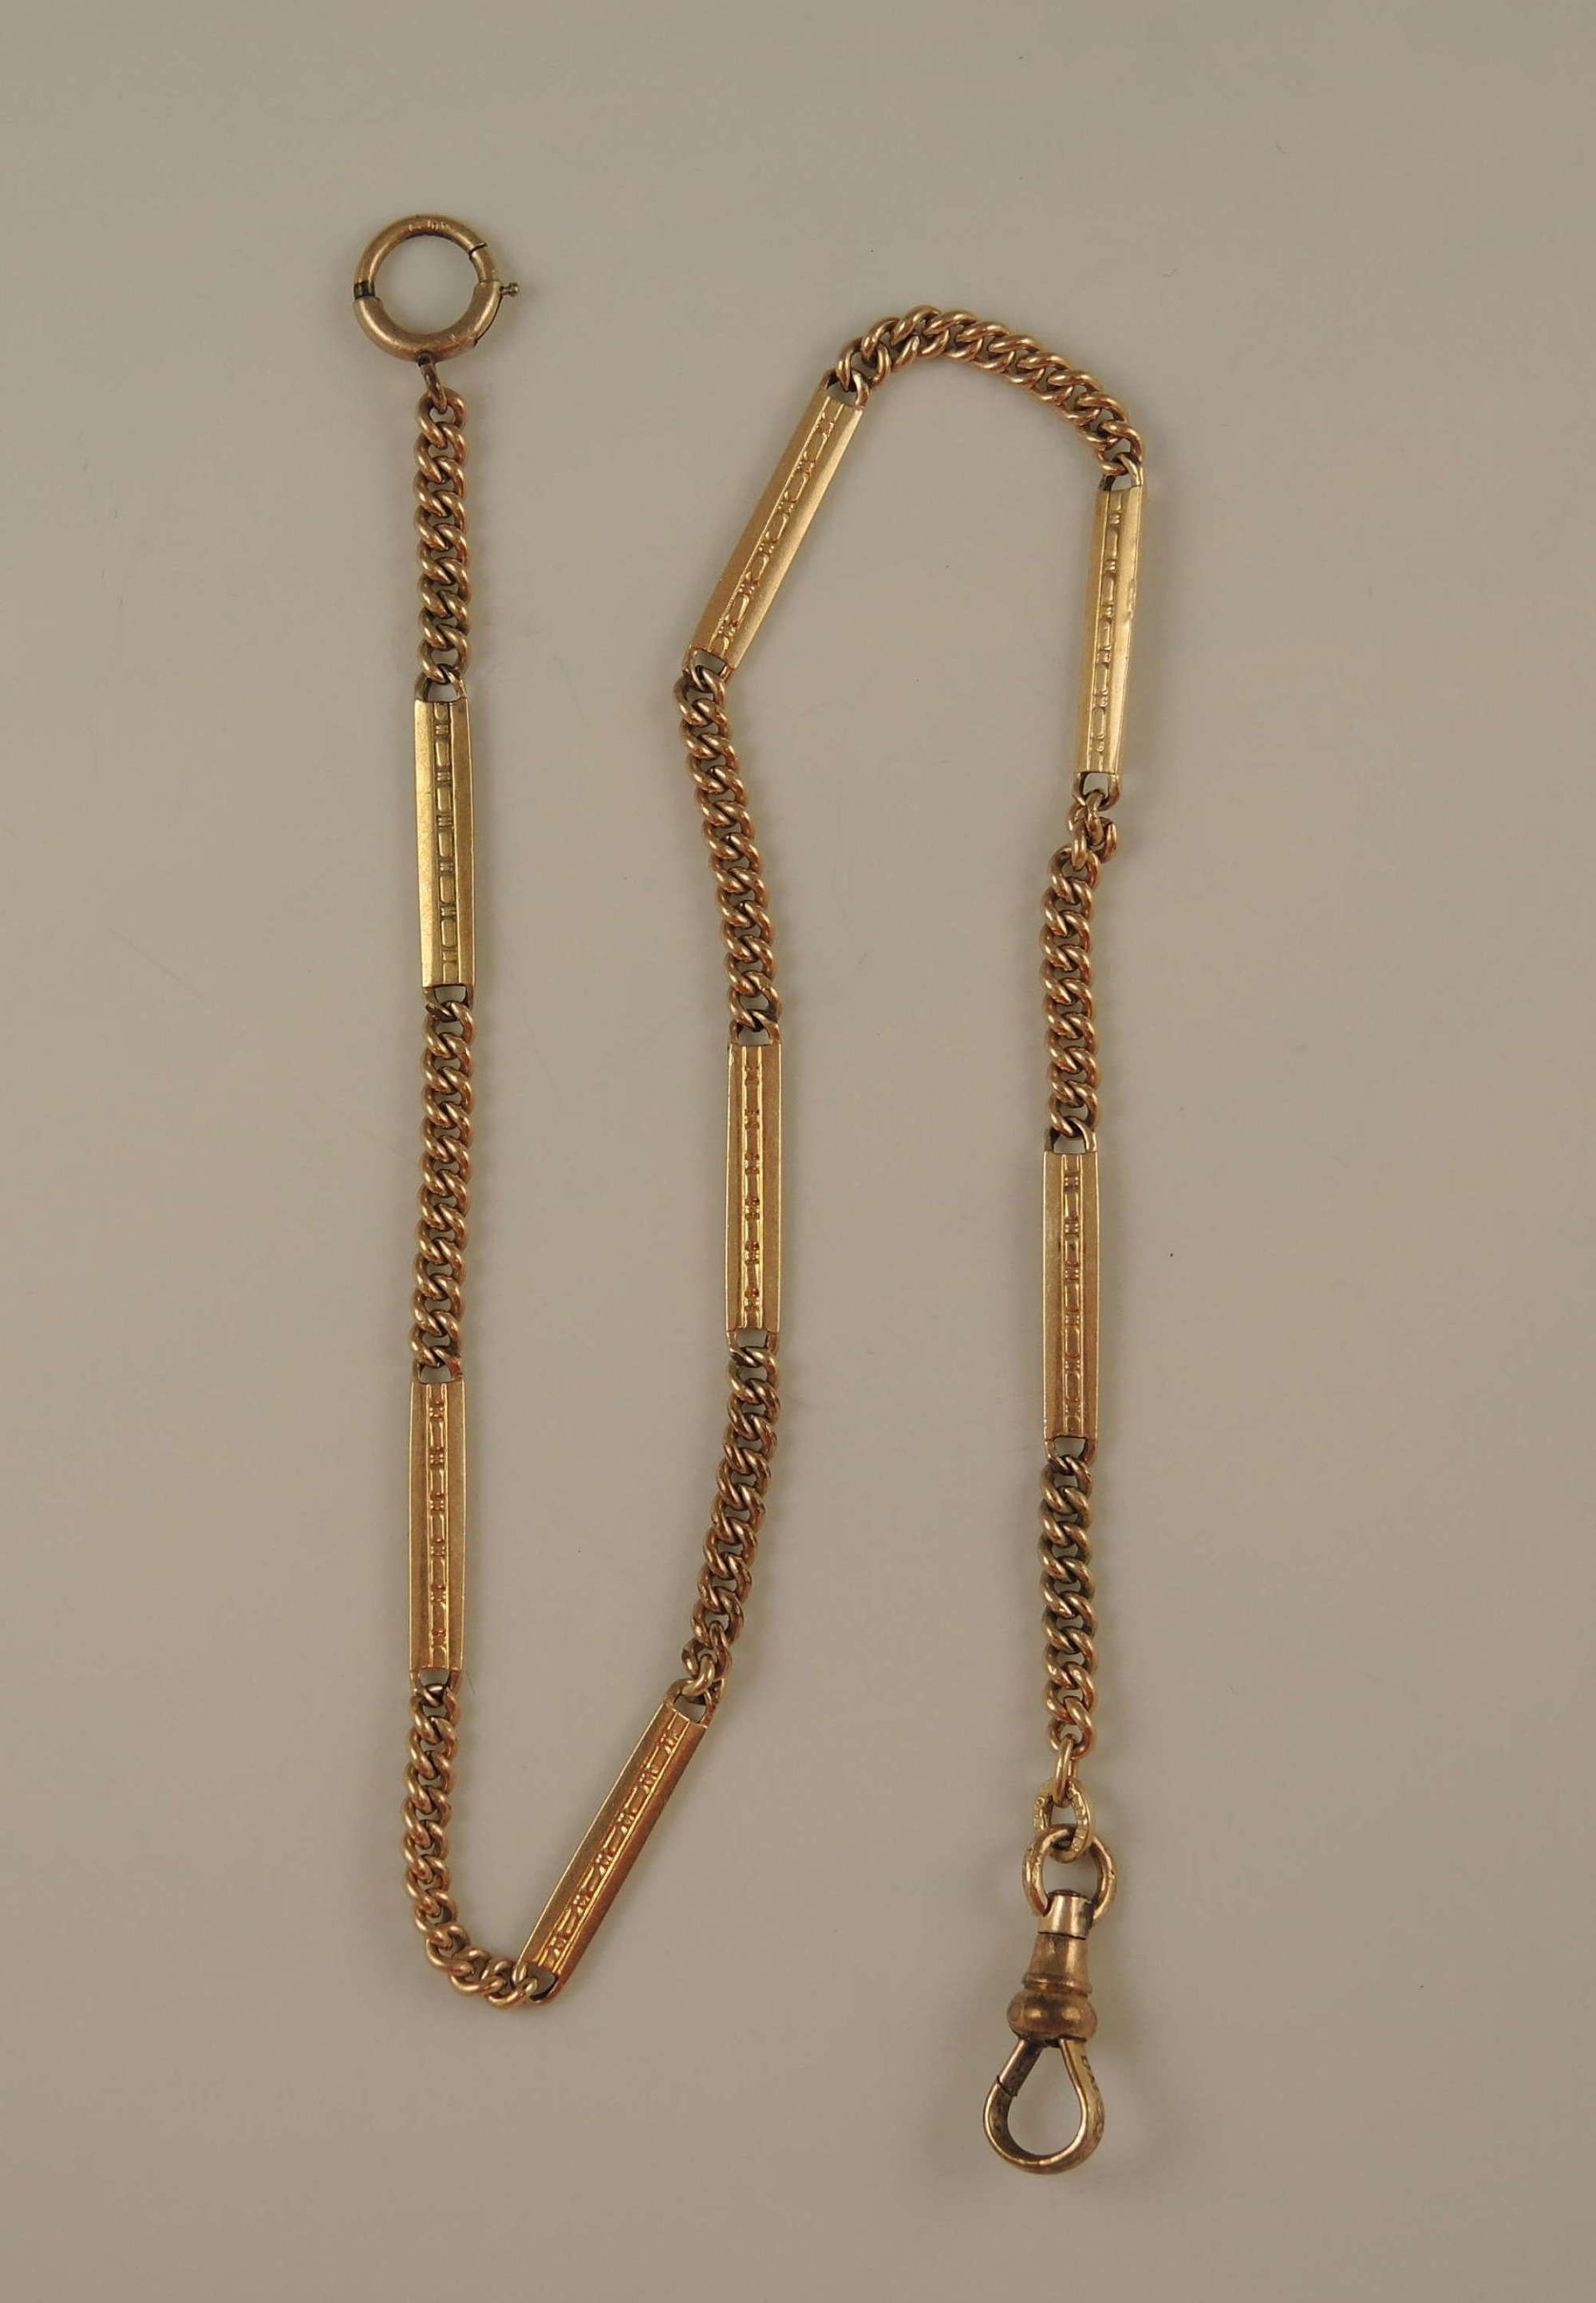 Antique gold filled watch chain c1910